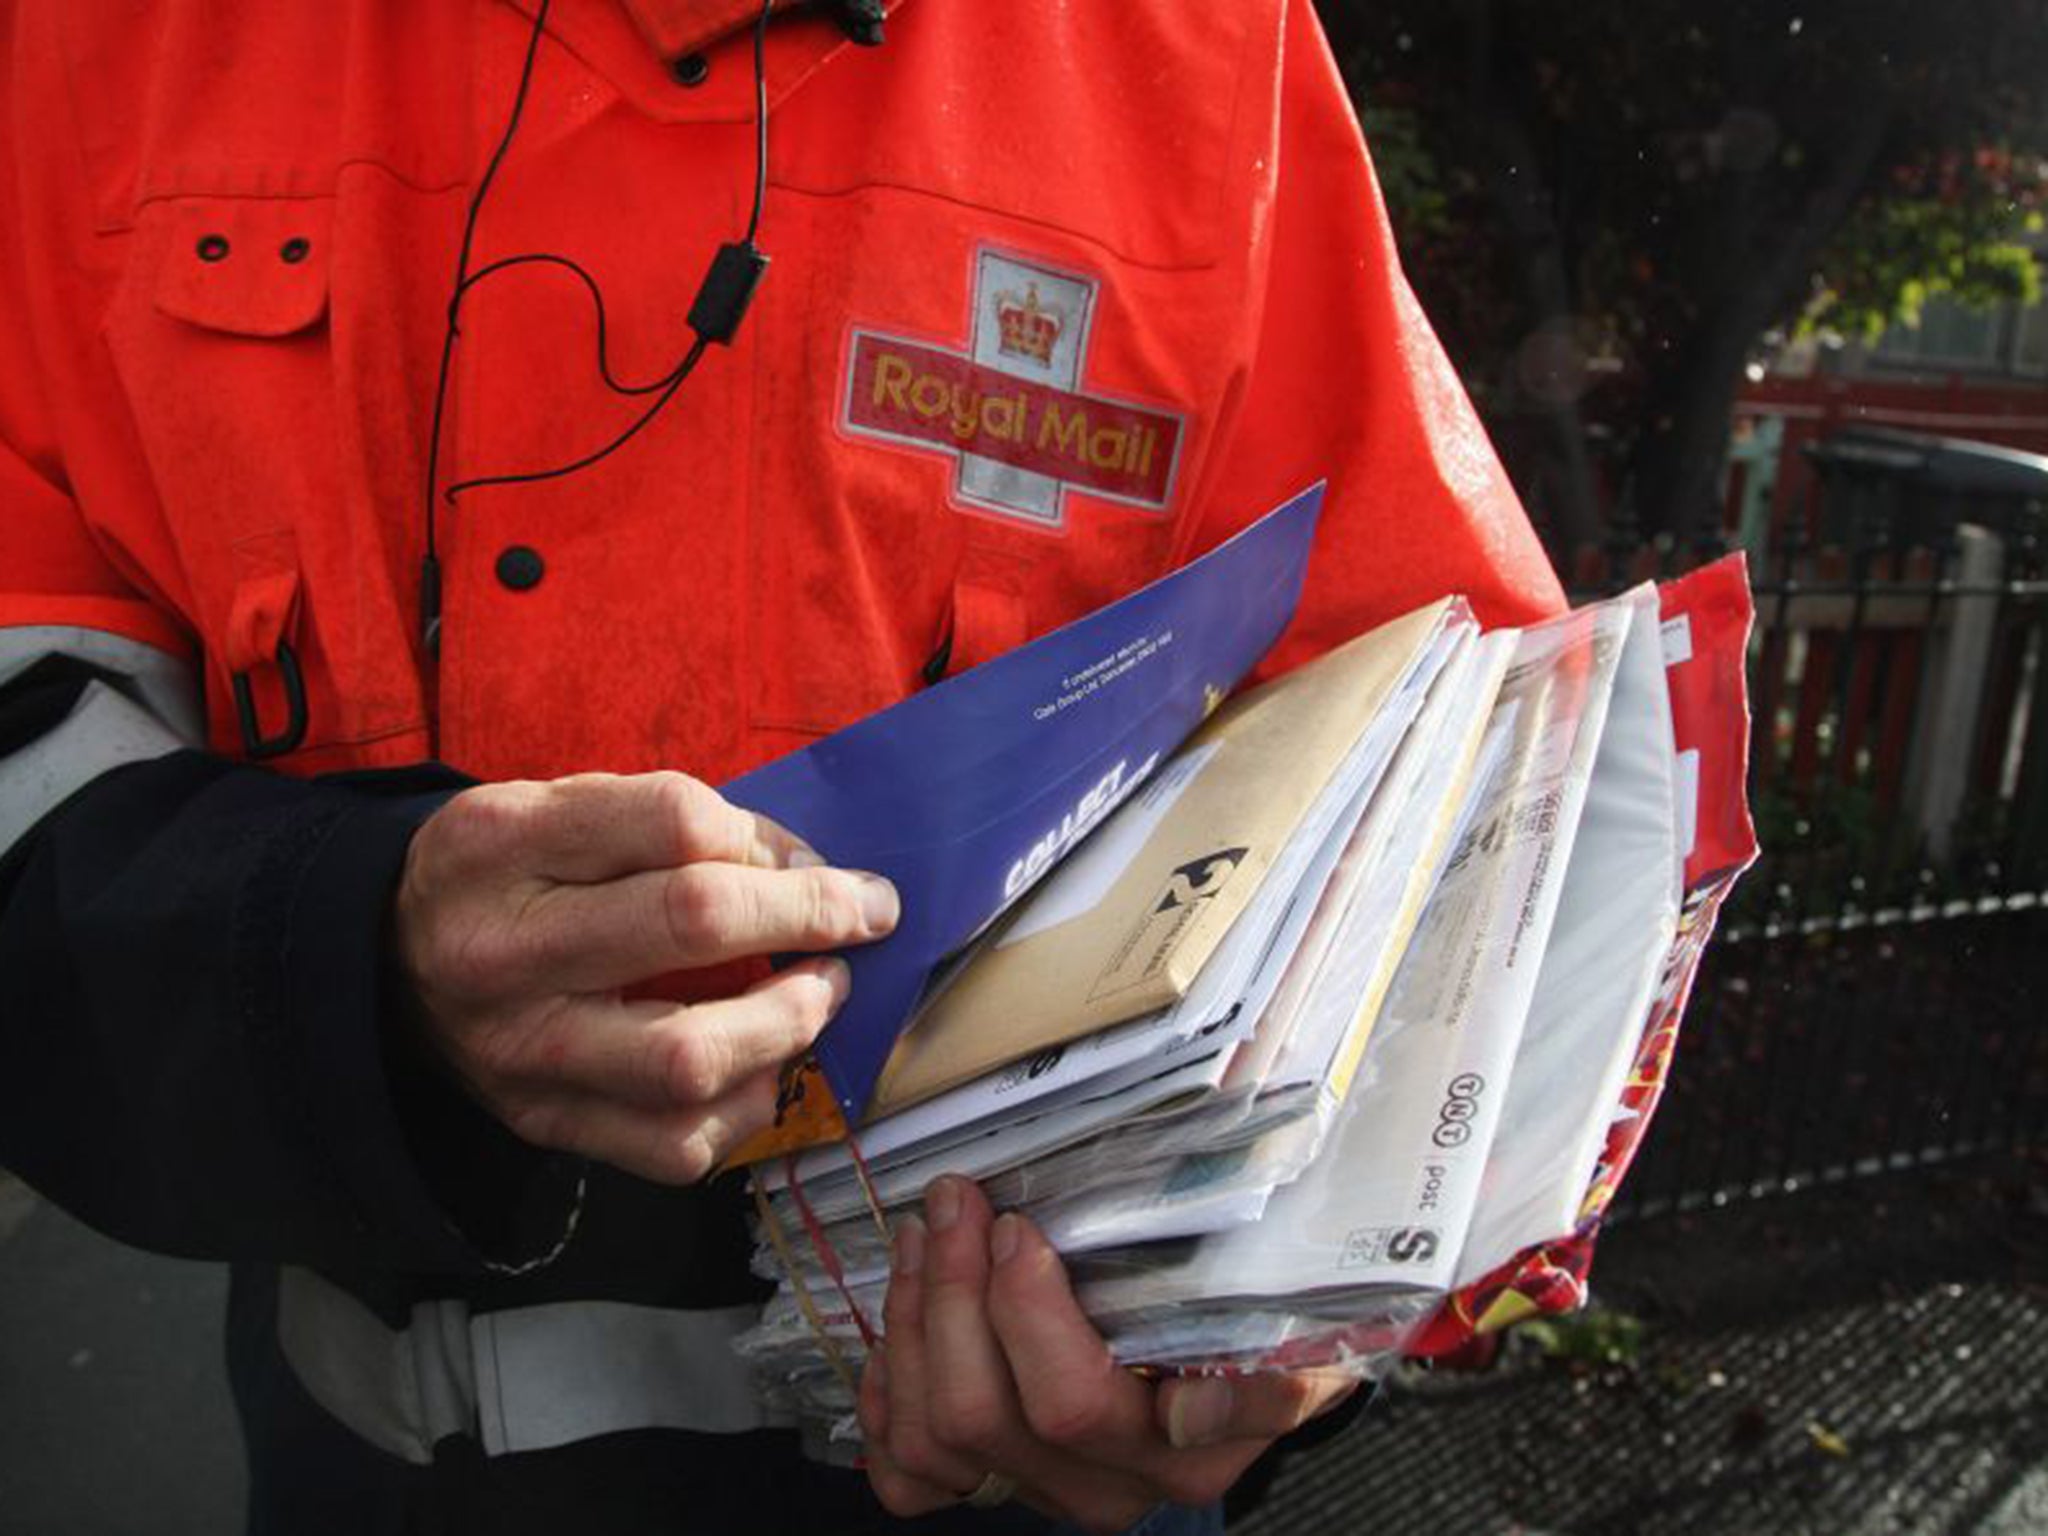 Postal service clerks perform any combination of tasks in a post office